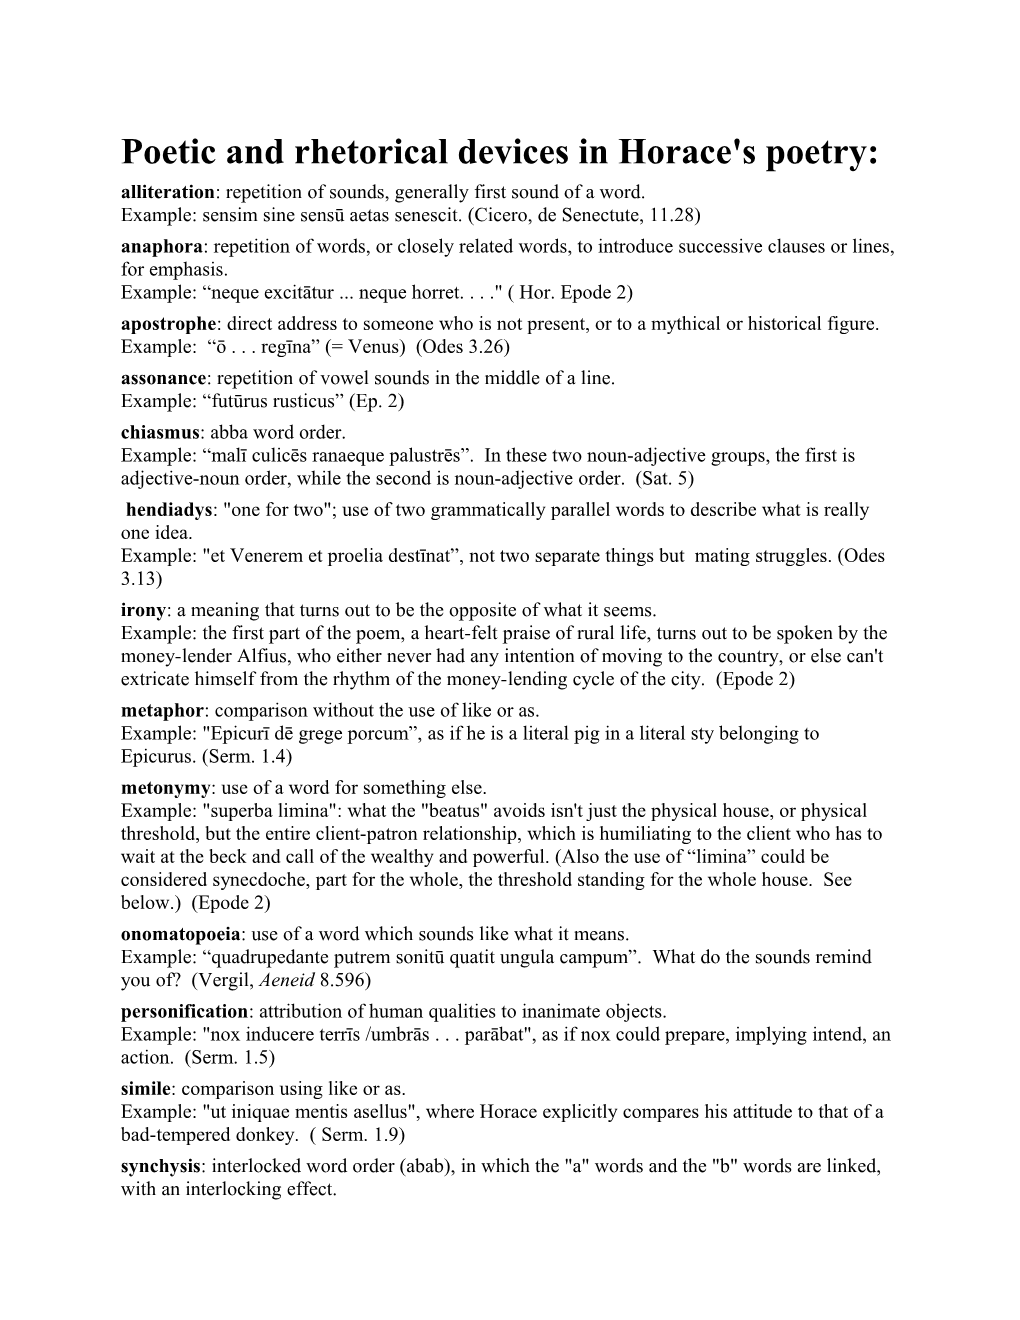 Poetic and Rhetorical Devices in Horace's Poetry